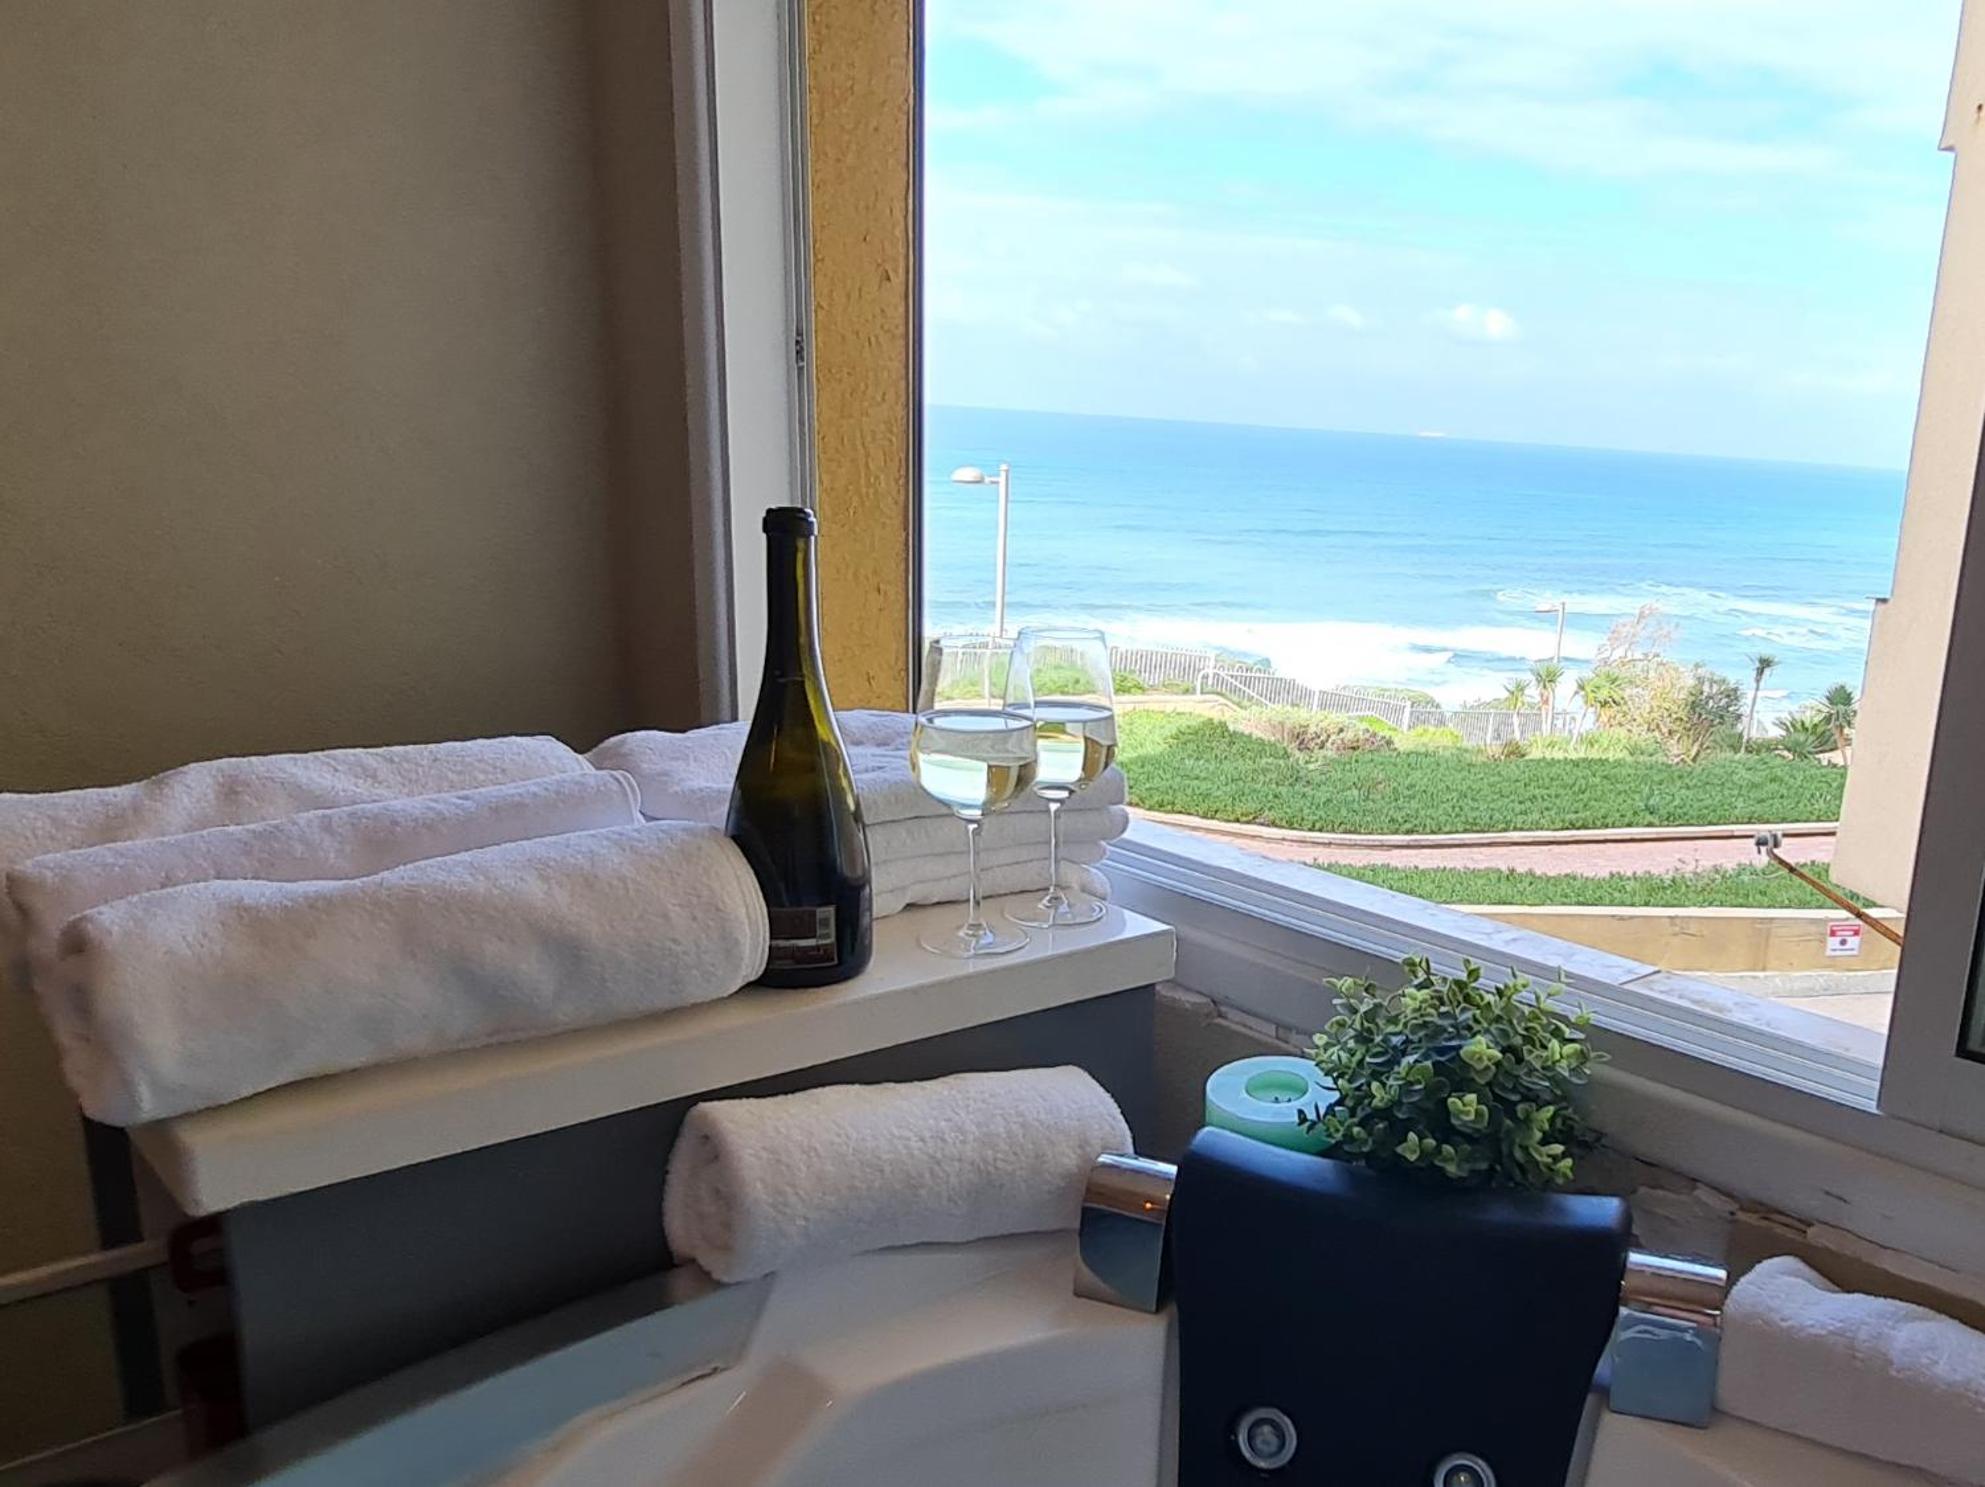 Magic On The Sea-Suites With A Private Jacuzzi And A Private Sea View 内坦亚 客房 照片